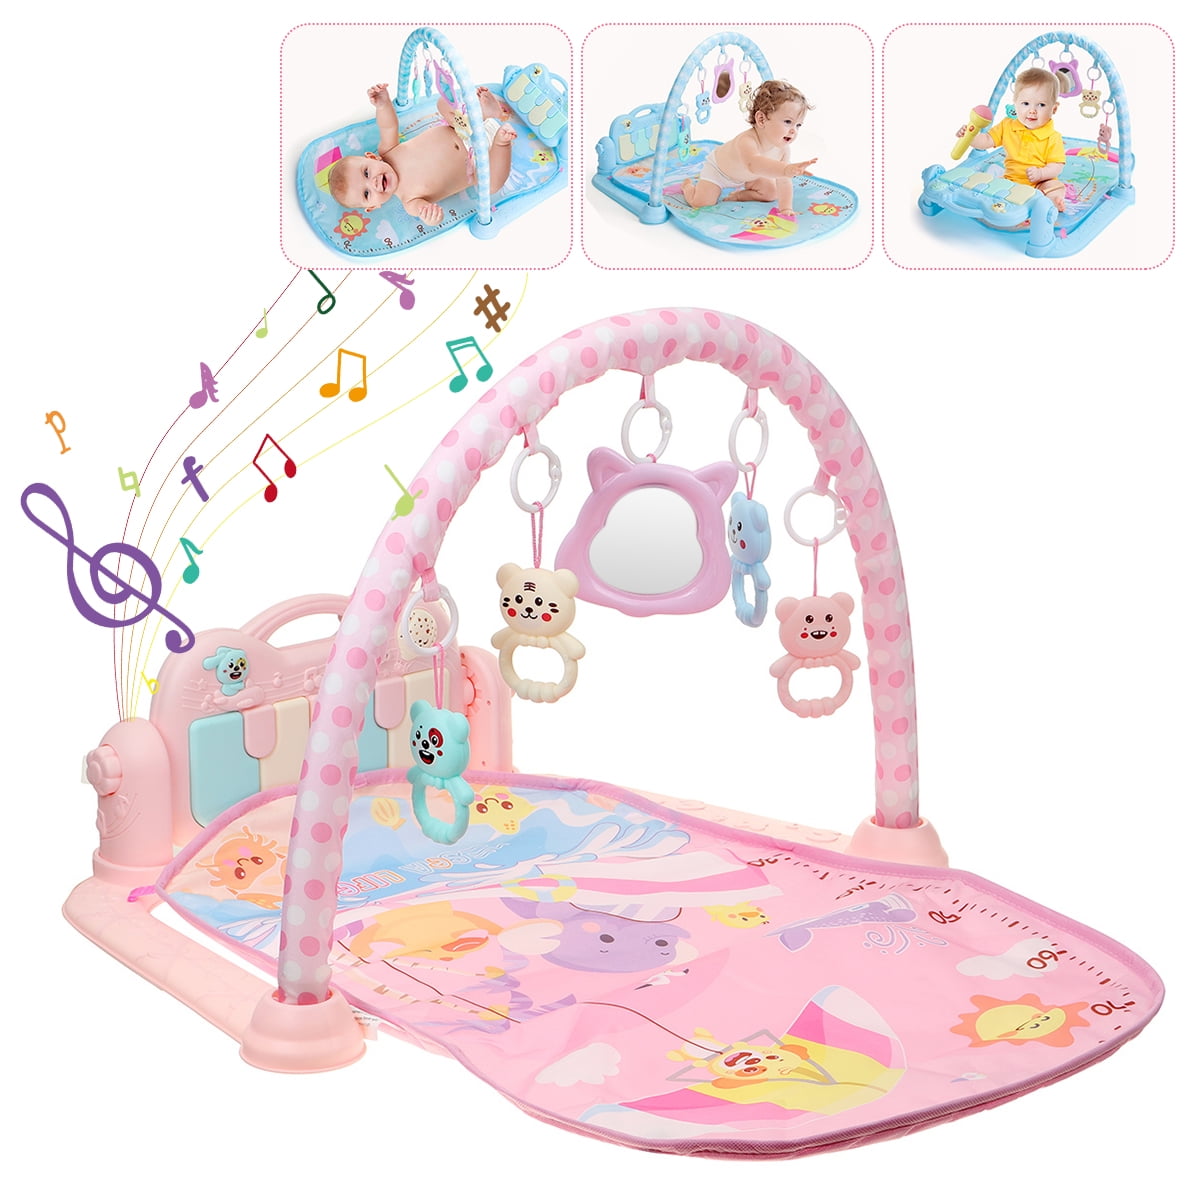 Baby Infant Gym Fitness Crawling Play Mat Floor Piano ...